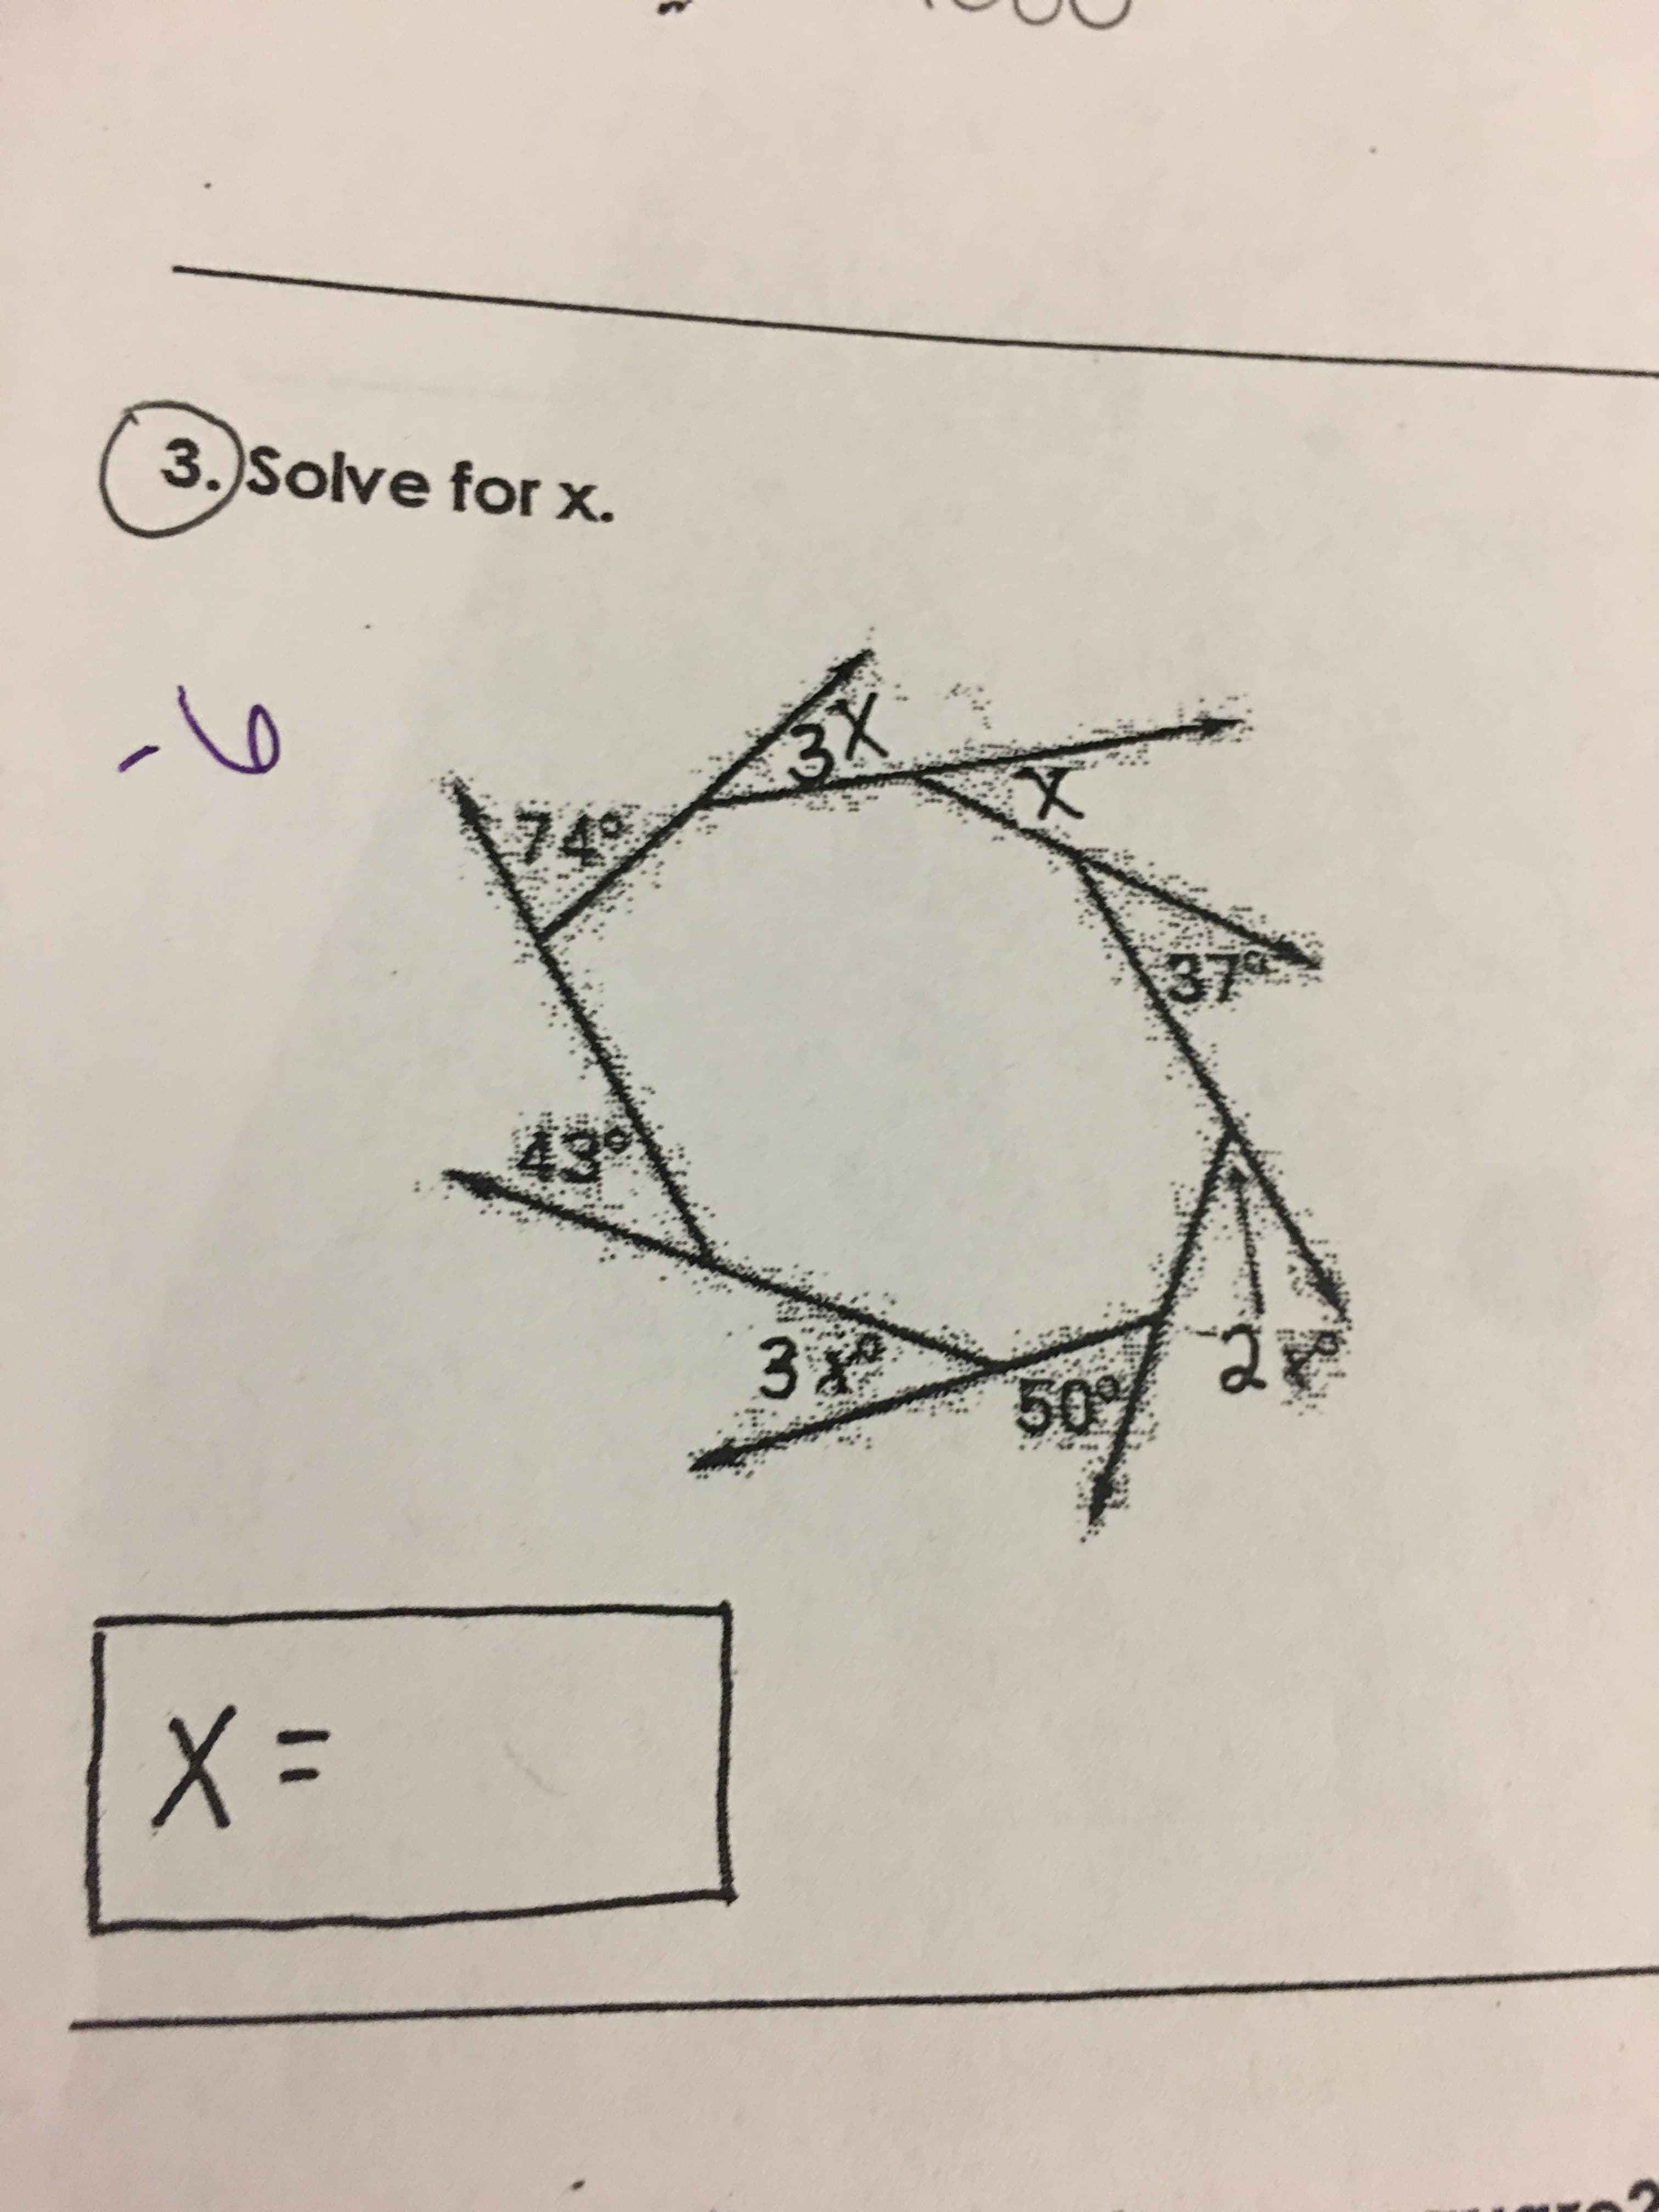 3. Solve for x.
